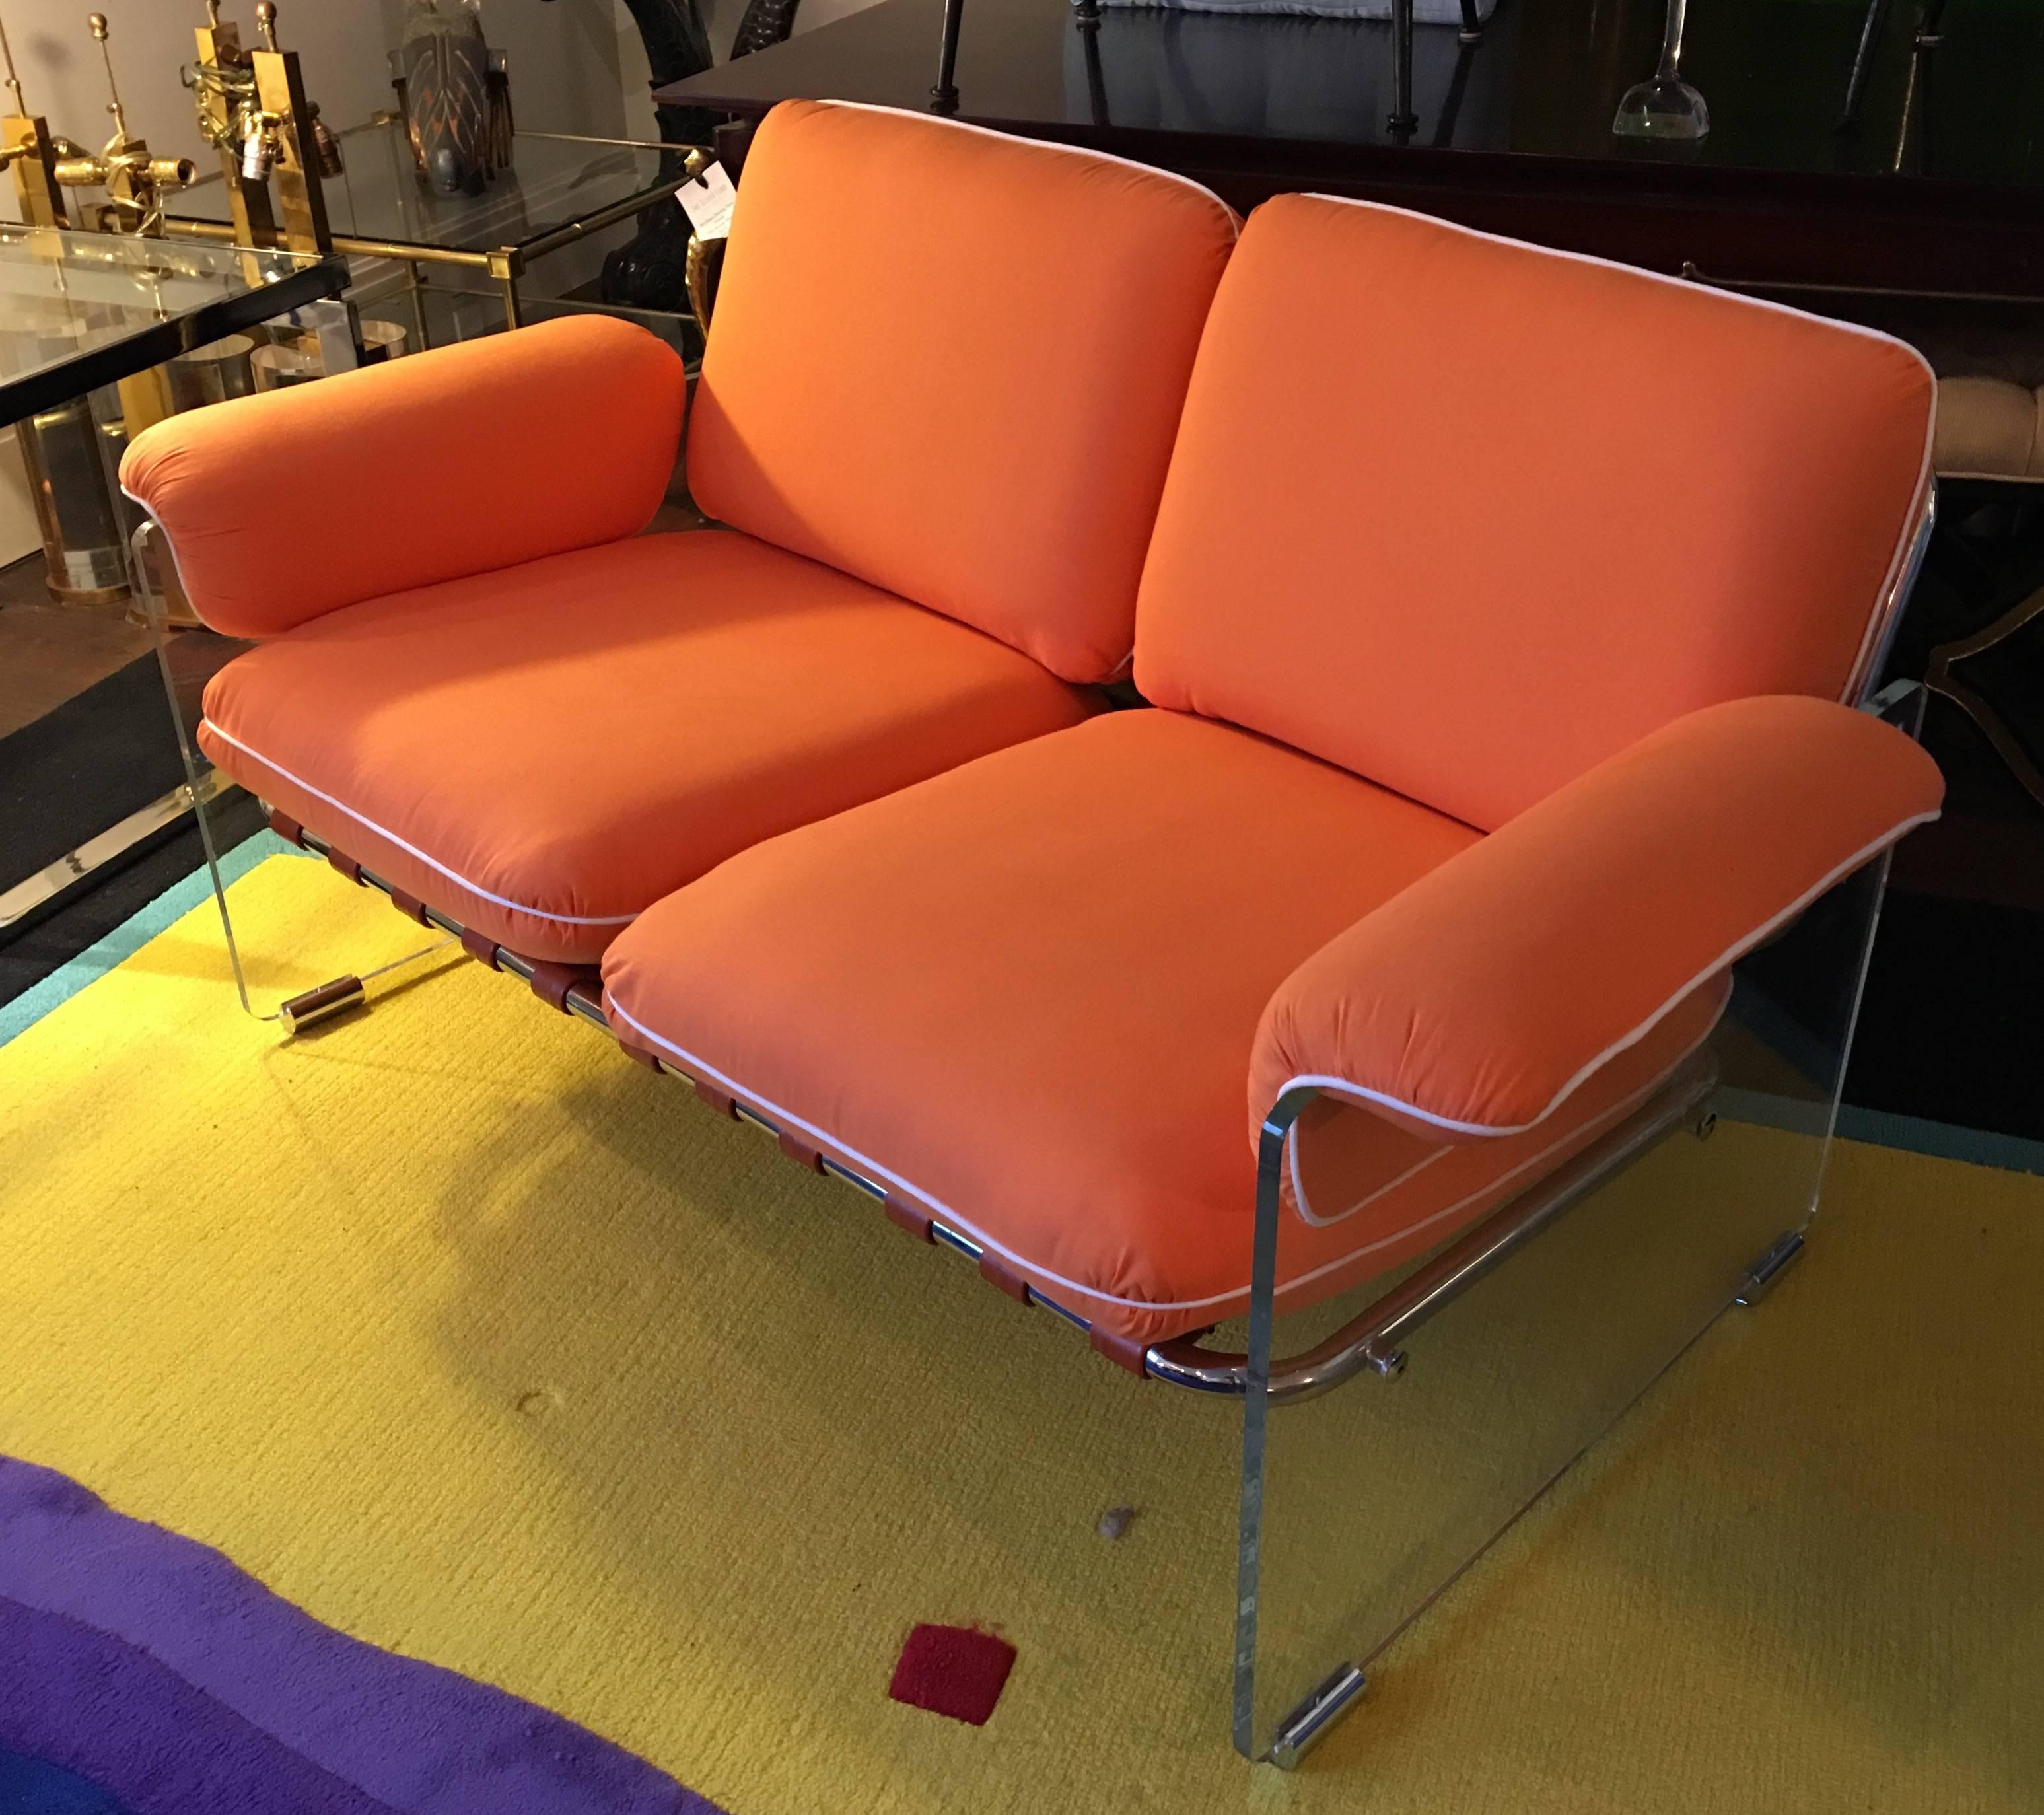 This Pace Lucite and chrome loveseat features tubular chrome back and seat structure flanked by Lucite panels which gives the piece the appearance of floating. Newly upholstered in a stunning orange fabric with white piping, circa 1970.